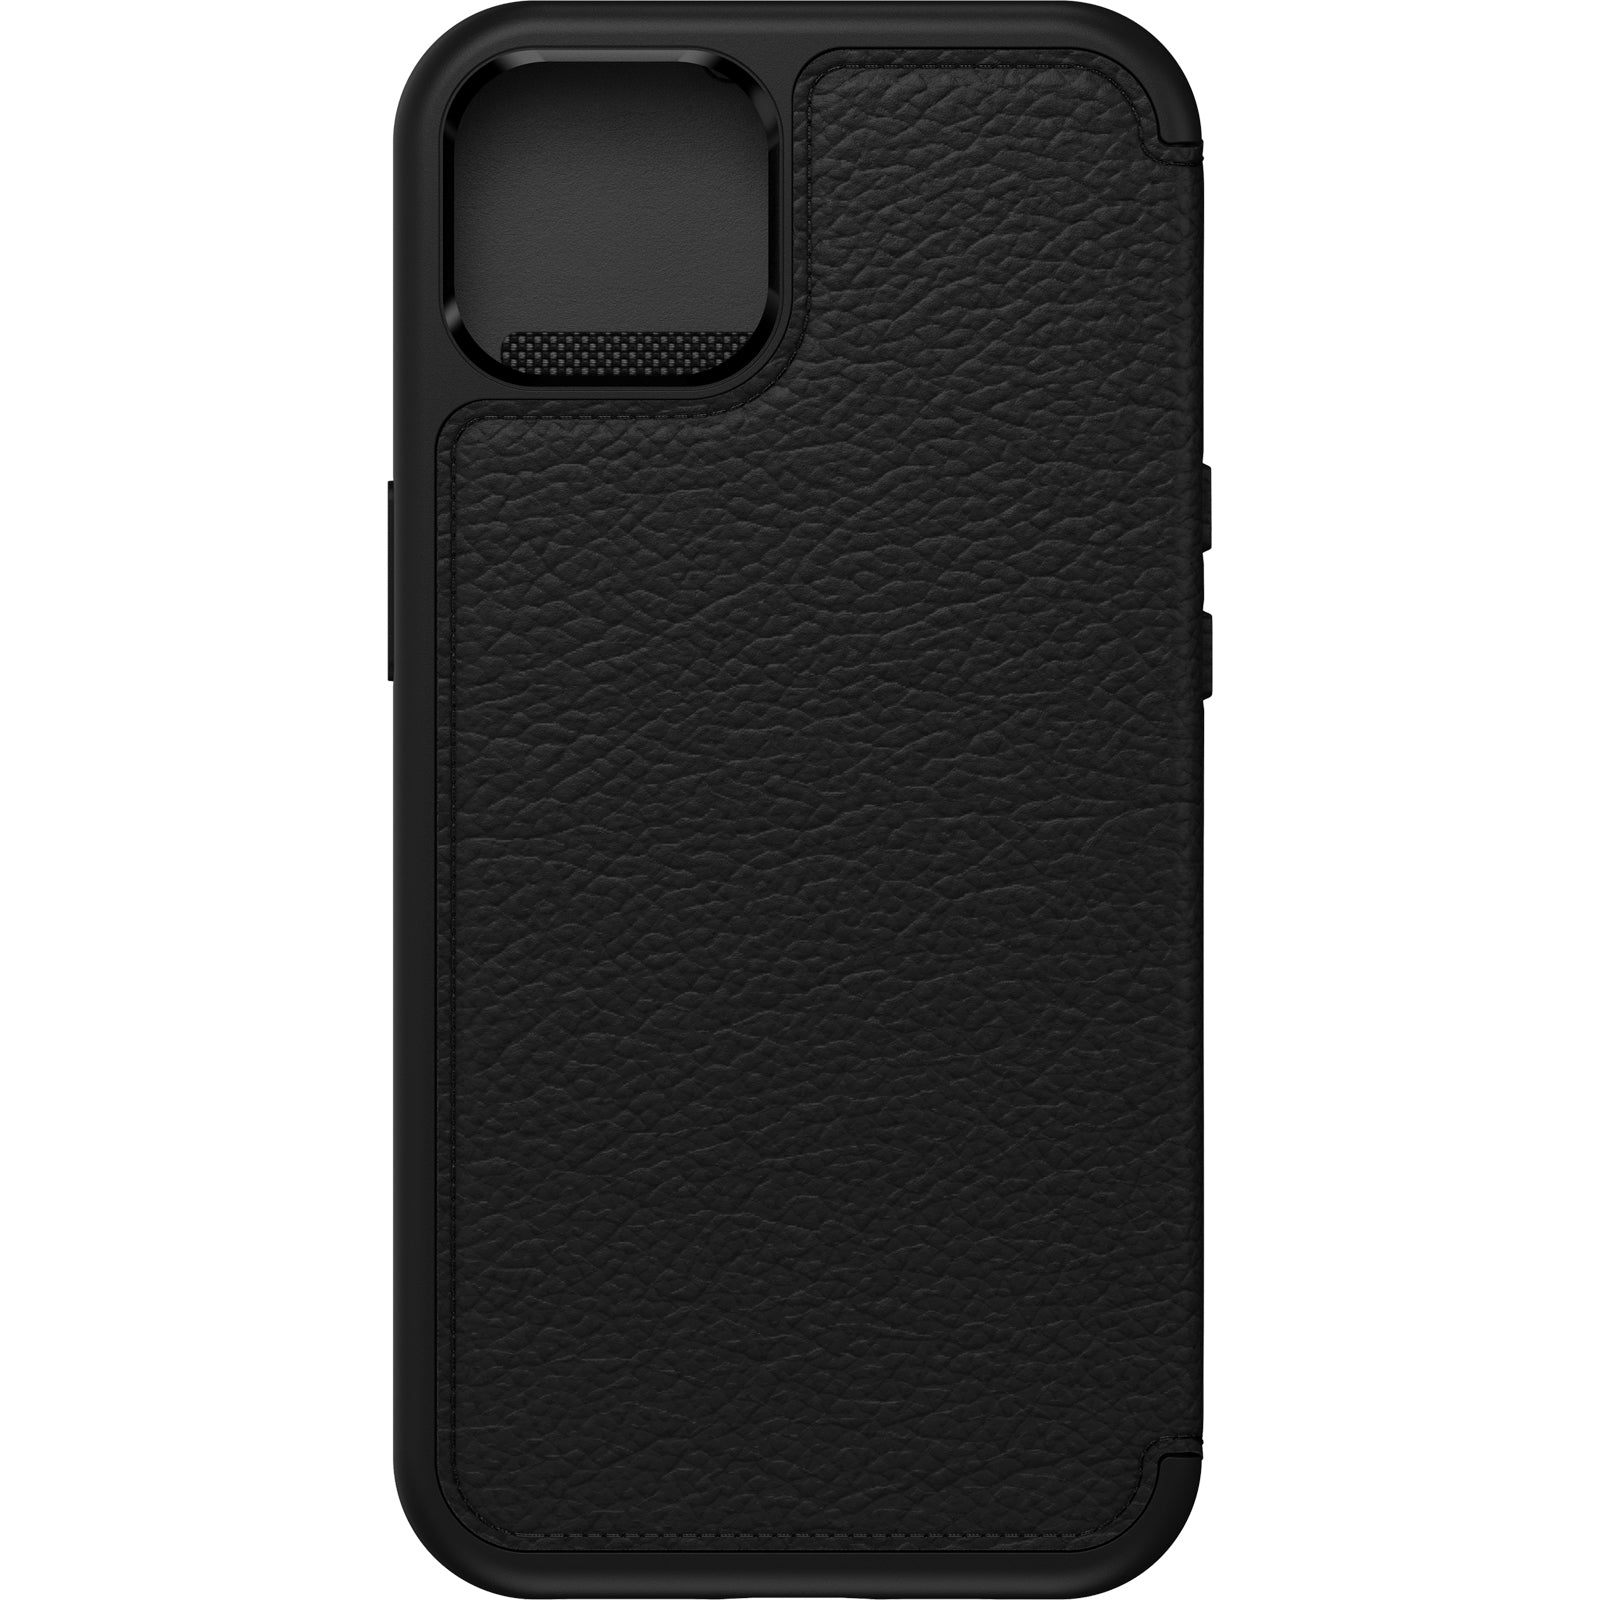 OtterBox Strada Folio Series for Apple iPhone 13, black - No retail packaging